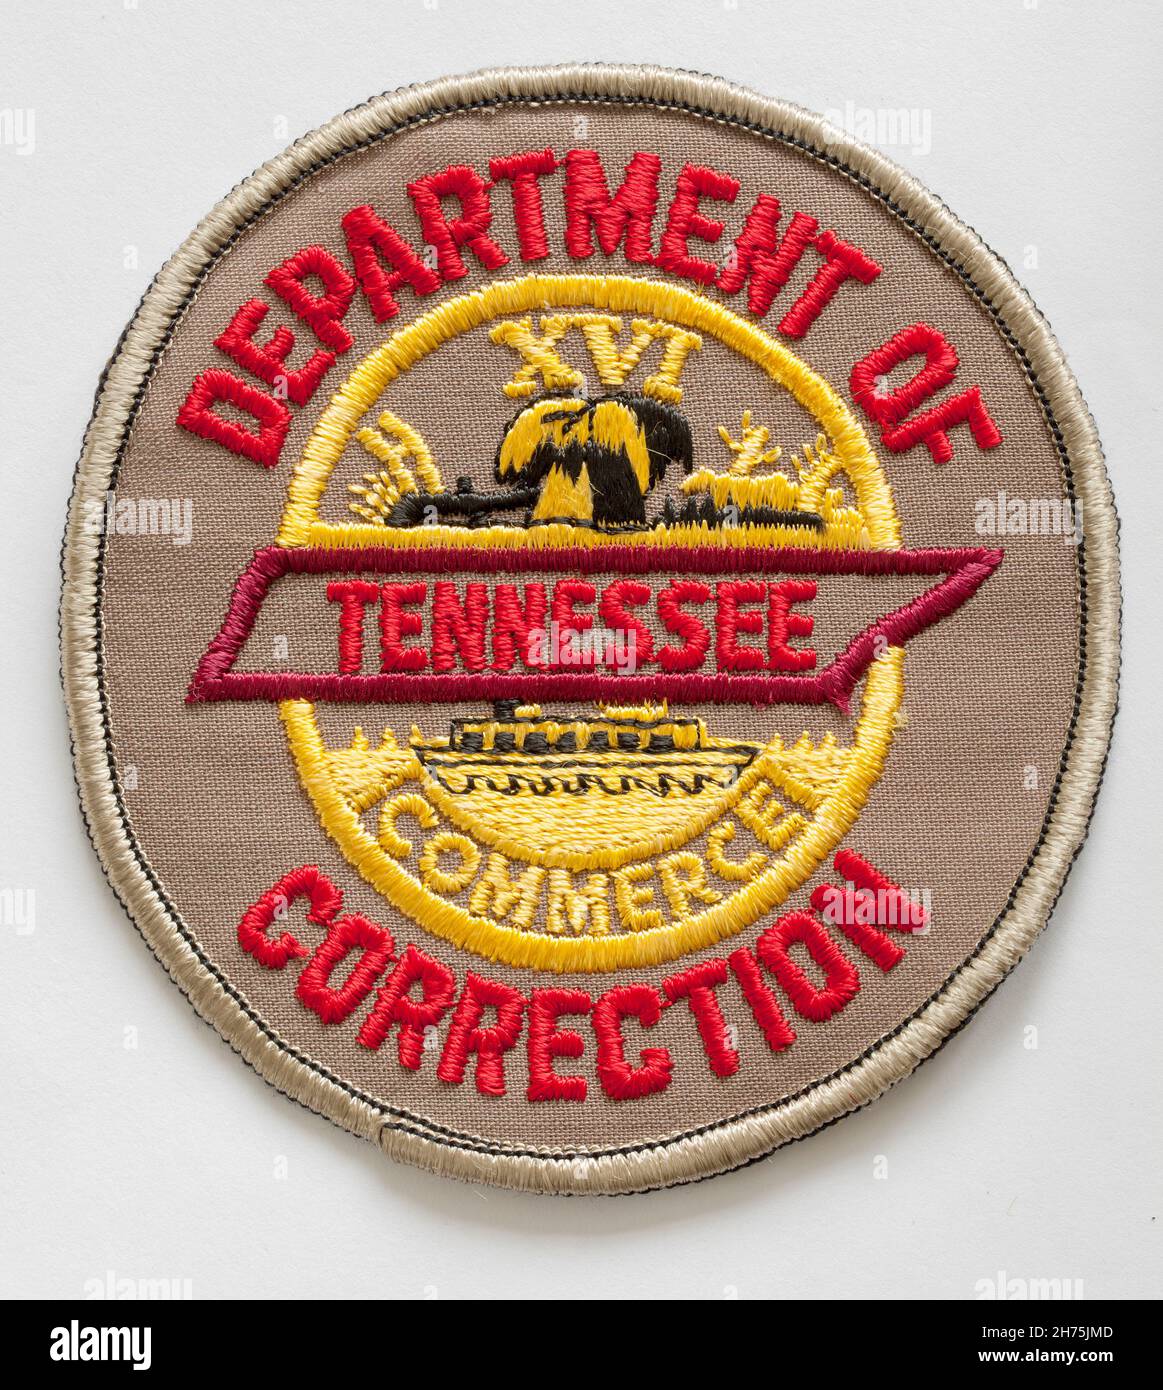 Vintage Department of Correction Tennessee Prison Officer Badge Patch Stock Photo